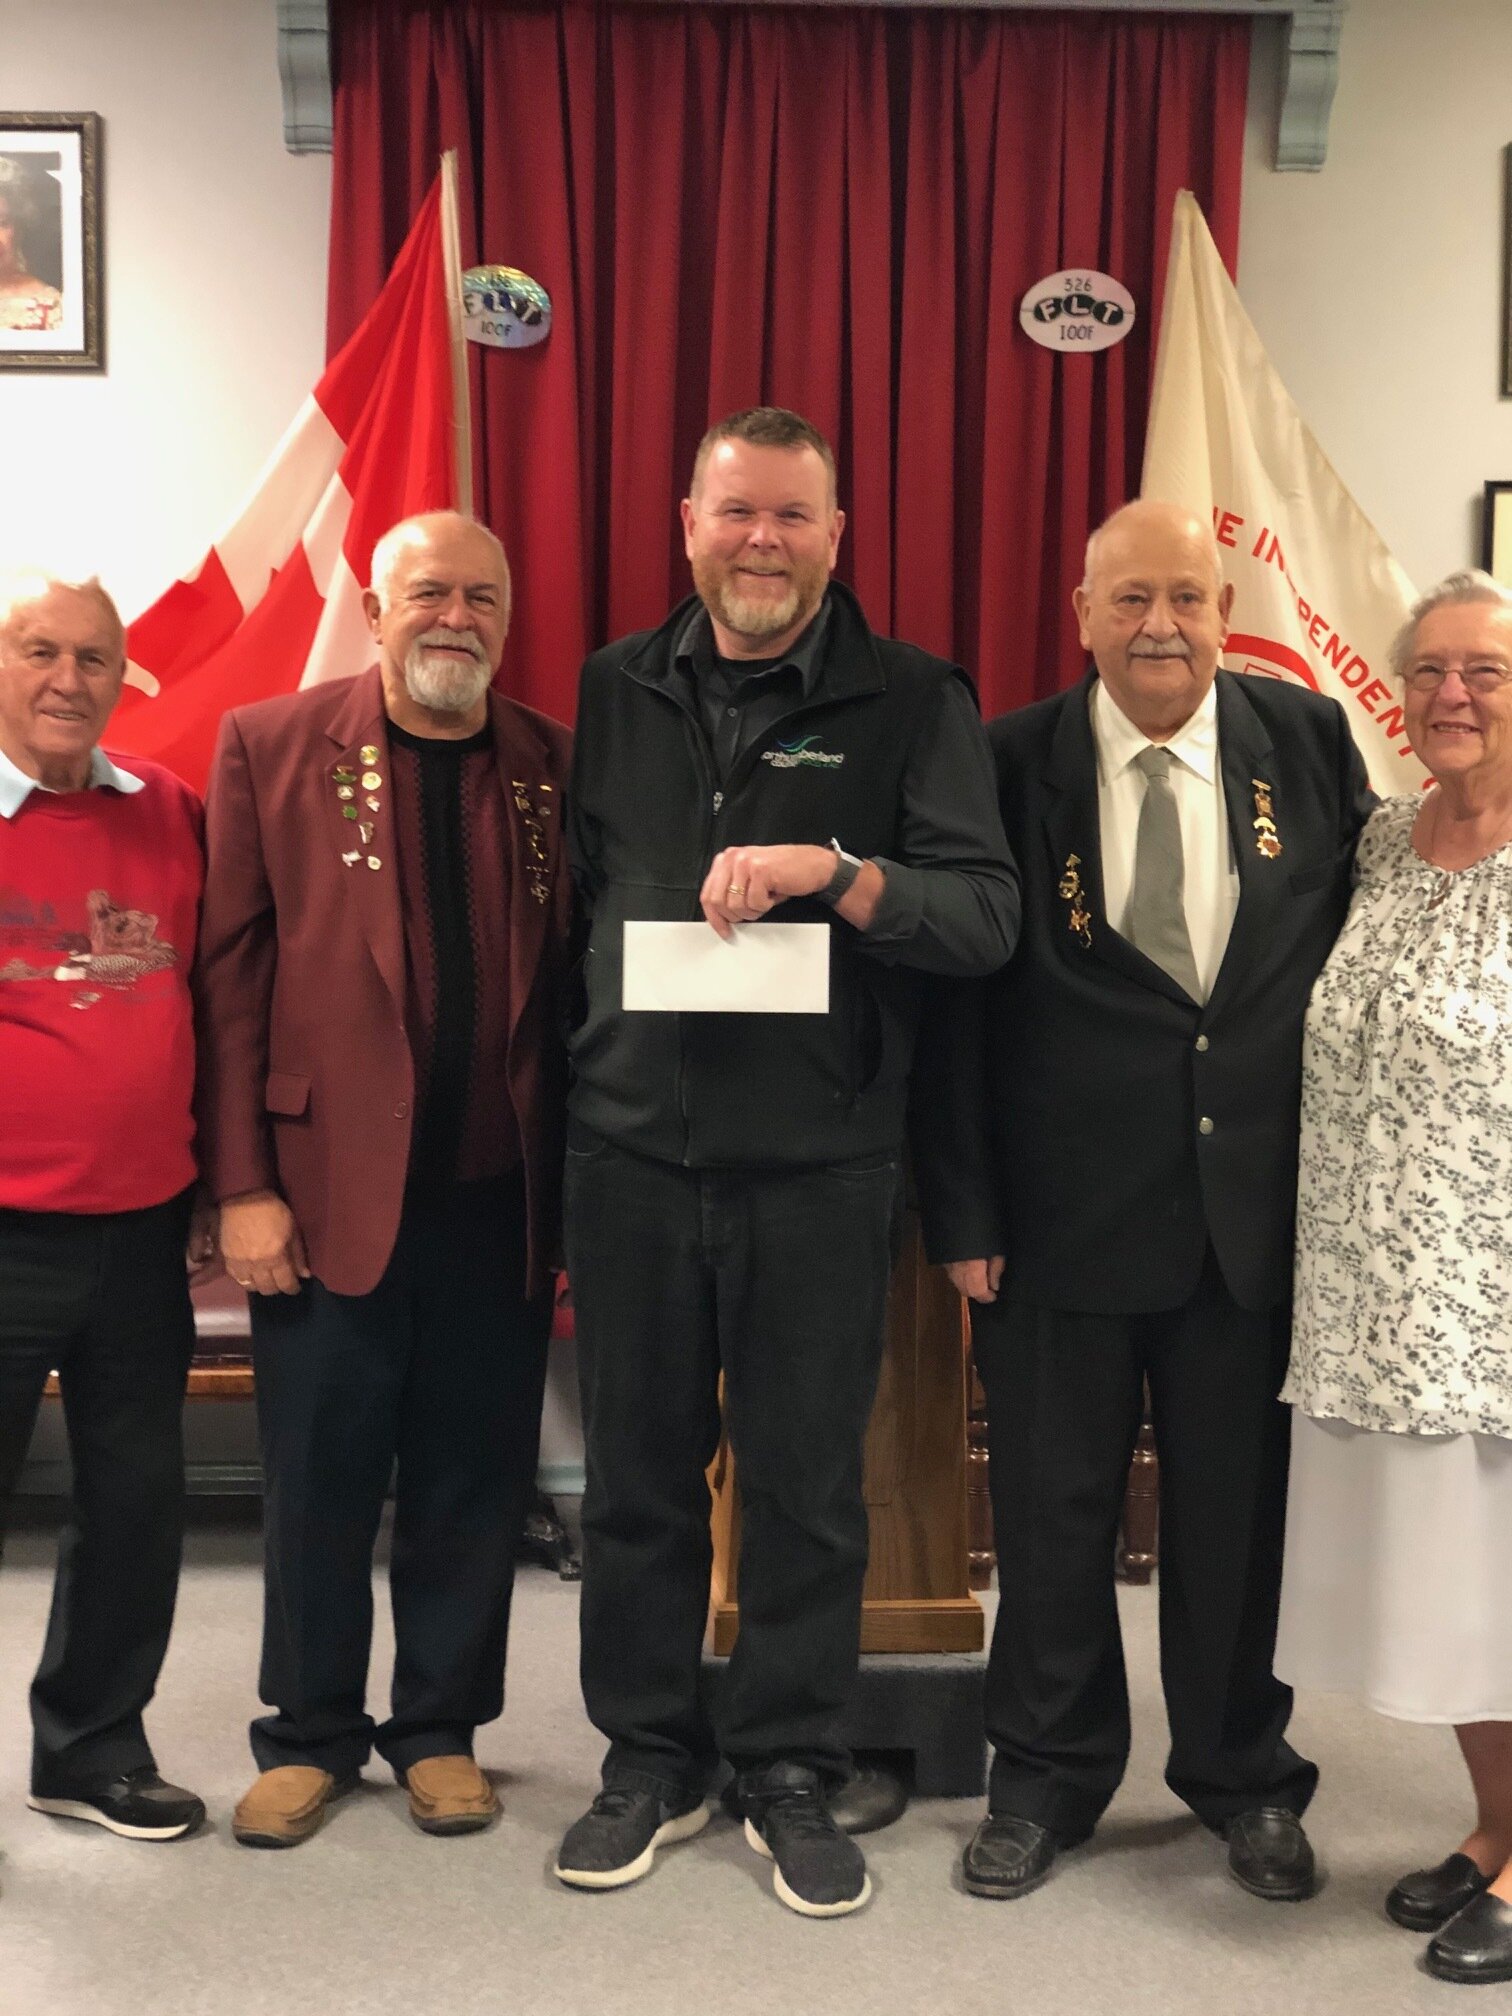  Food 4 All Warehouse manager Rob O'Neill (centre) was delighted to receive a donation from the Durham Memorial Temple Oddfellows Lodge #78 Port Hope and Rebekahs #131 members (from left) Carl Nelson, Dave Bannister, Ed Lake and Glynda Bannister. 